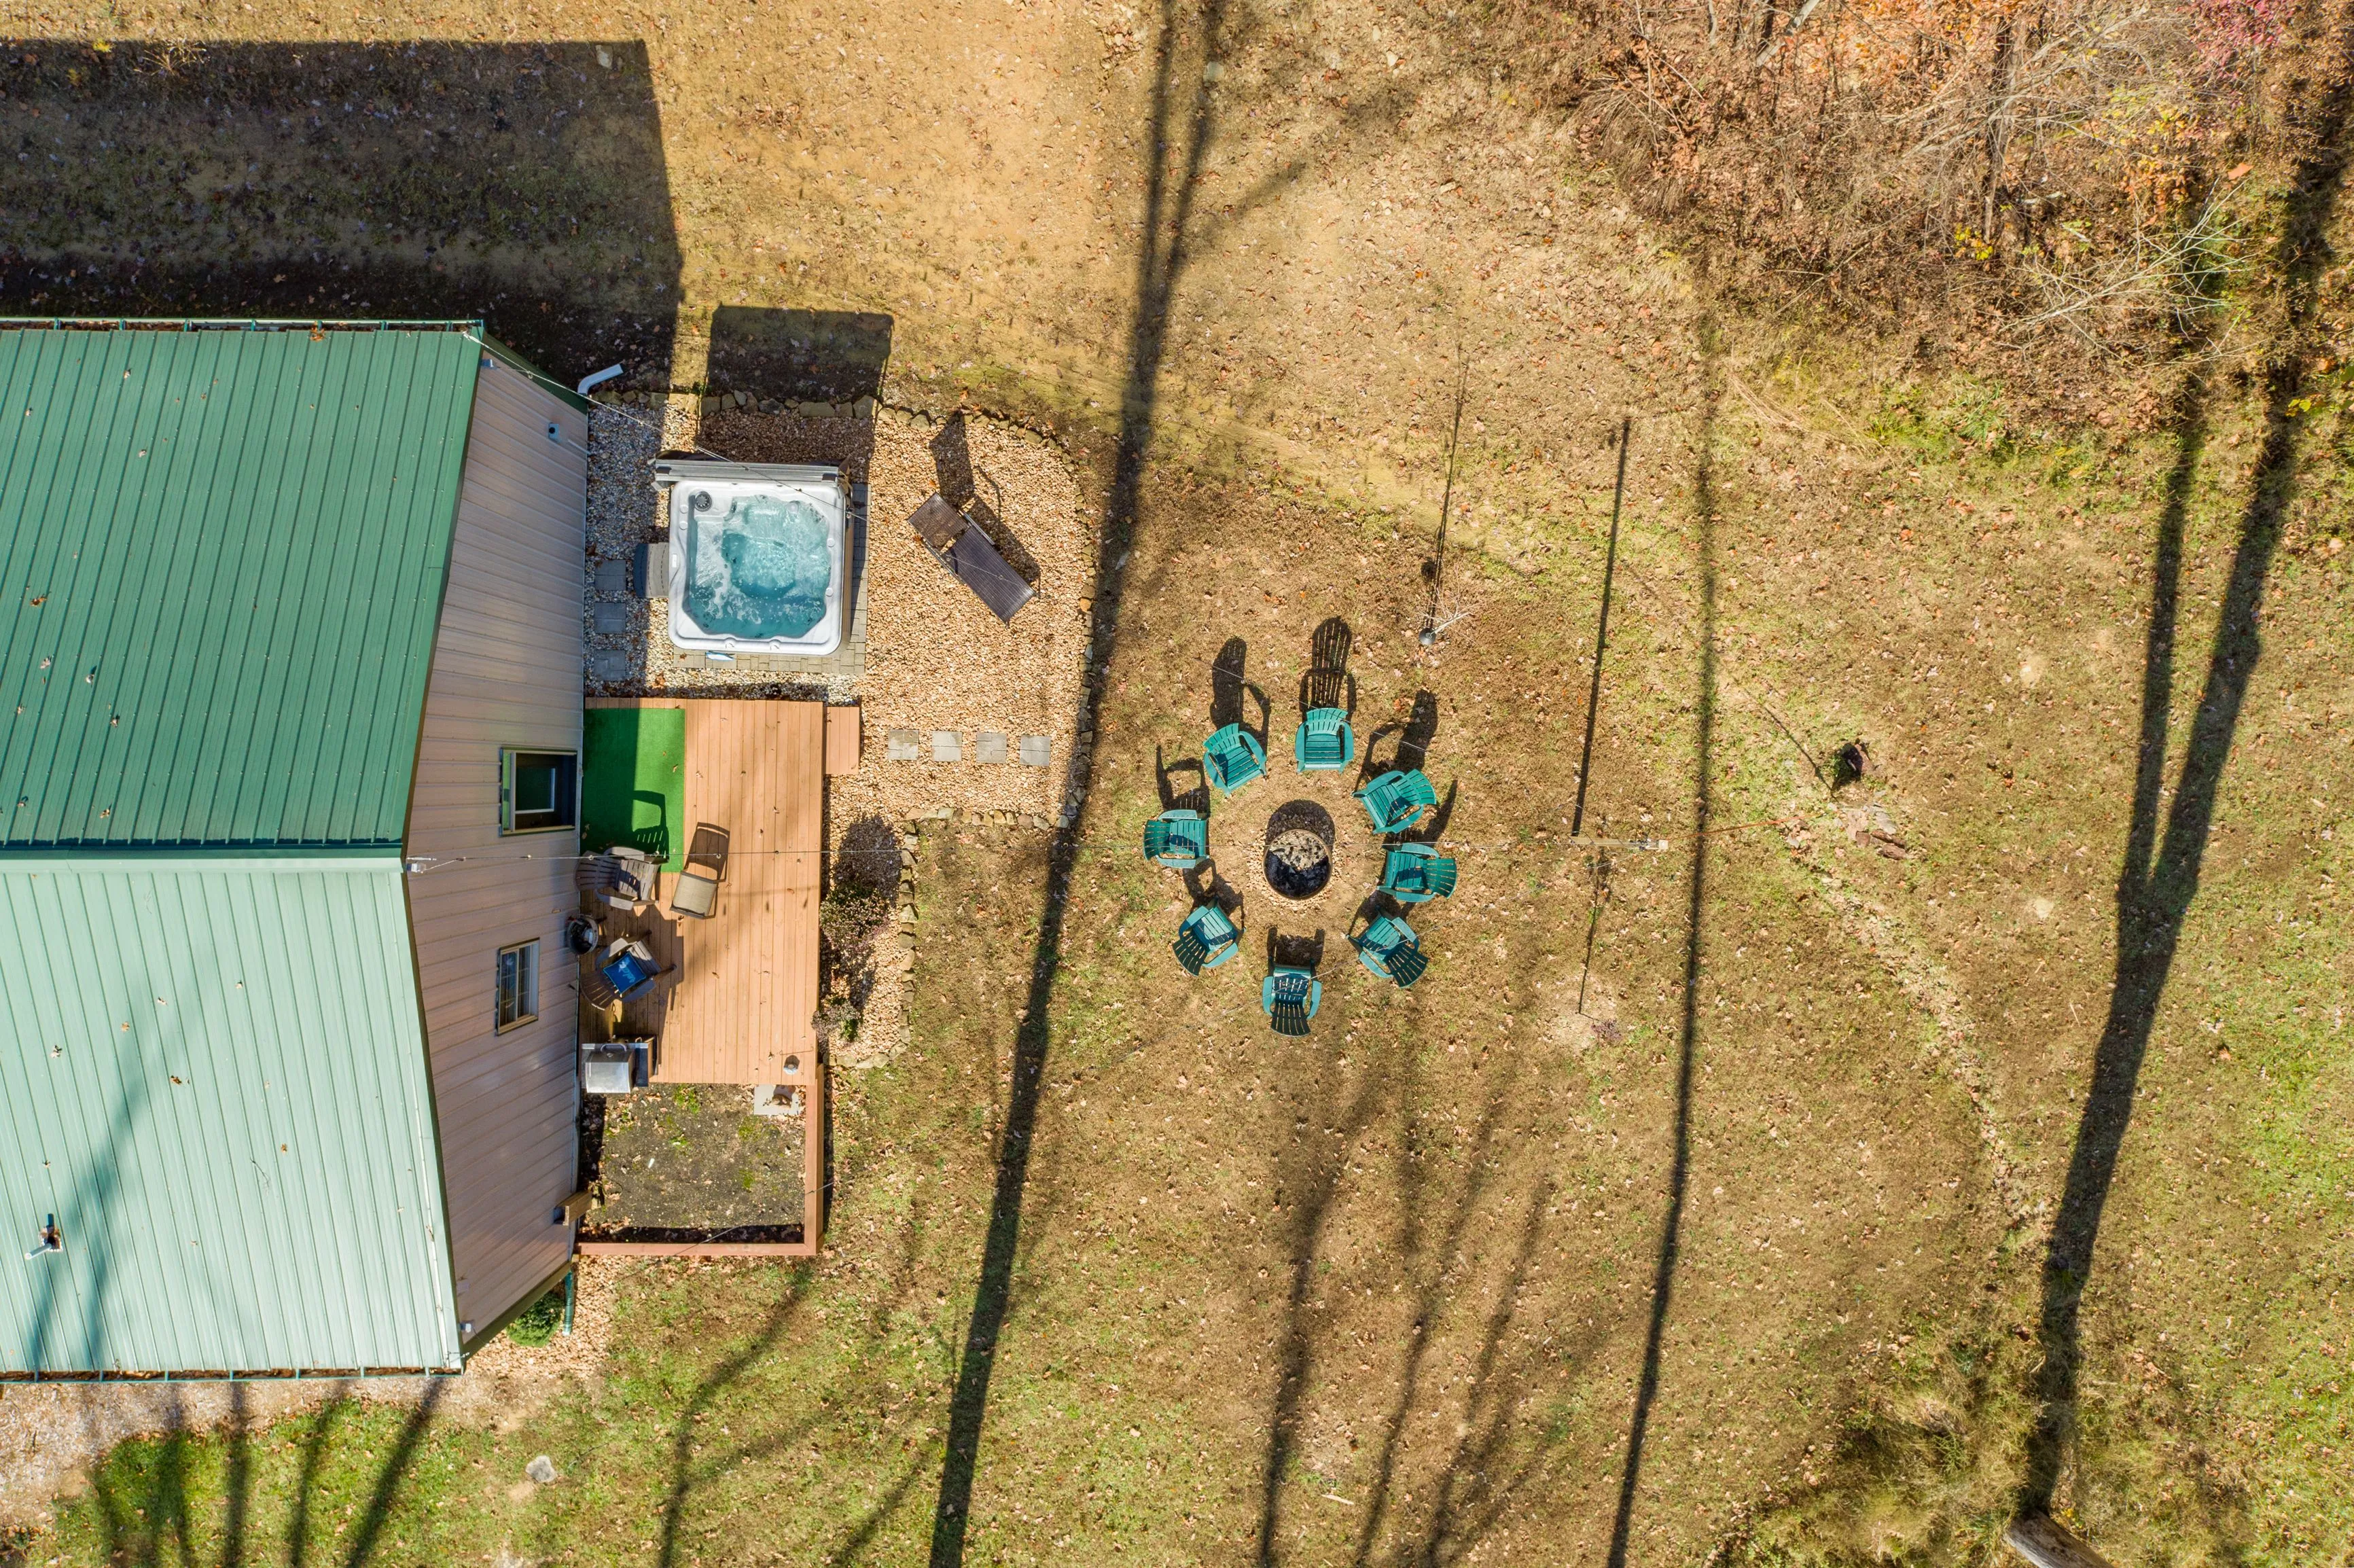 Aerial view of a backyard with a green-roofed house, wooden deck, hot tub, and a circular arrangement of chairs around a fire pit.